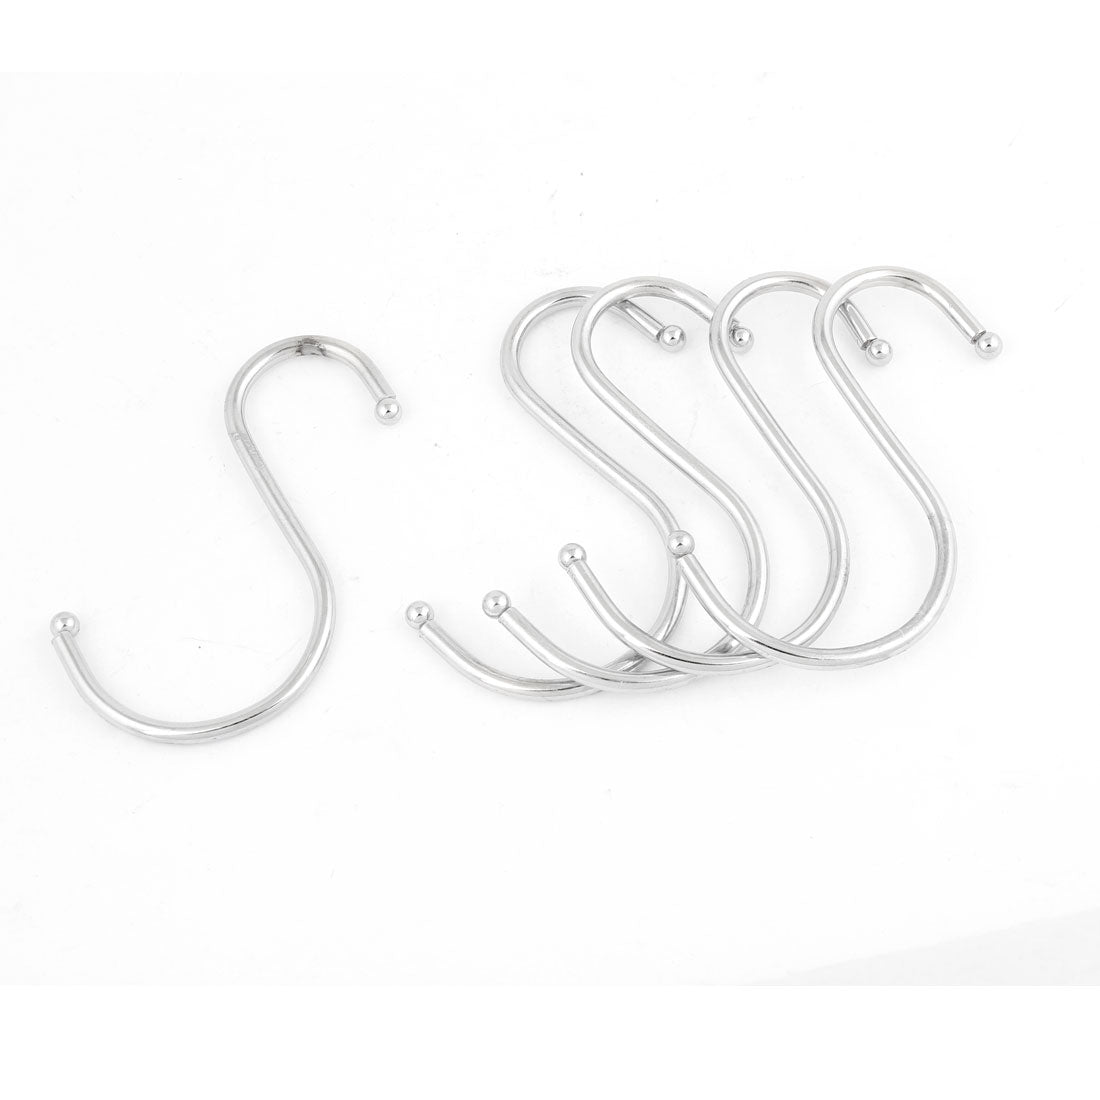 uxcell Uxcell 5 Pcs Kitchen Stainless Steel Hanger S Shape Hook Silver Tone